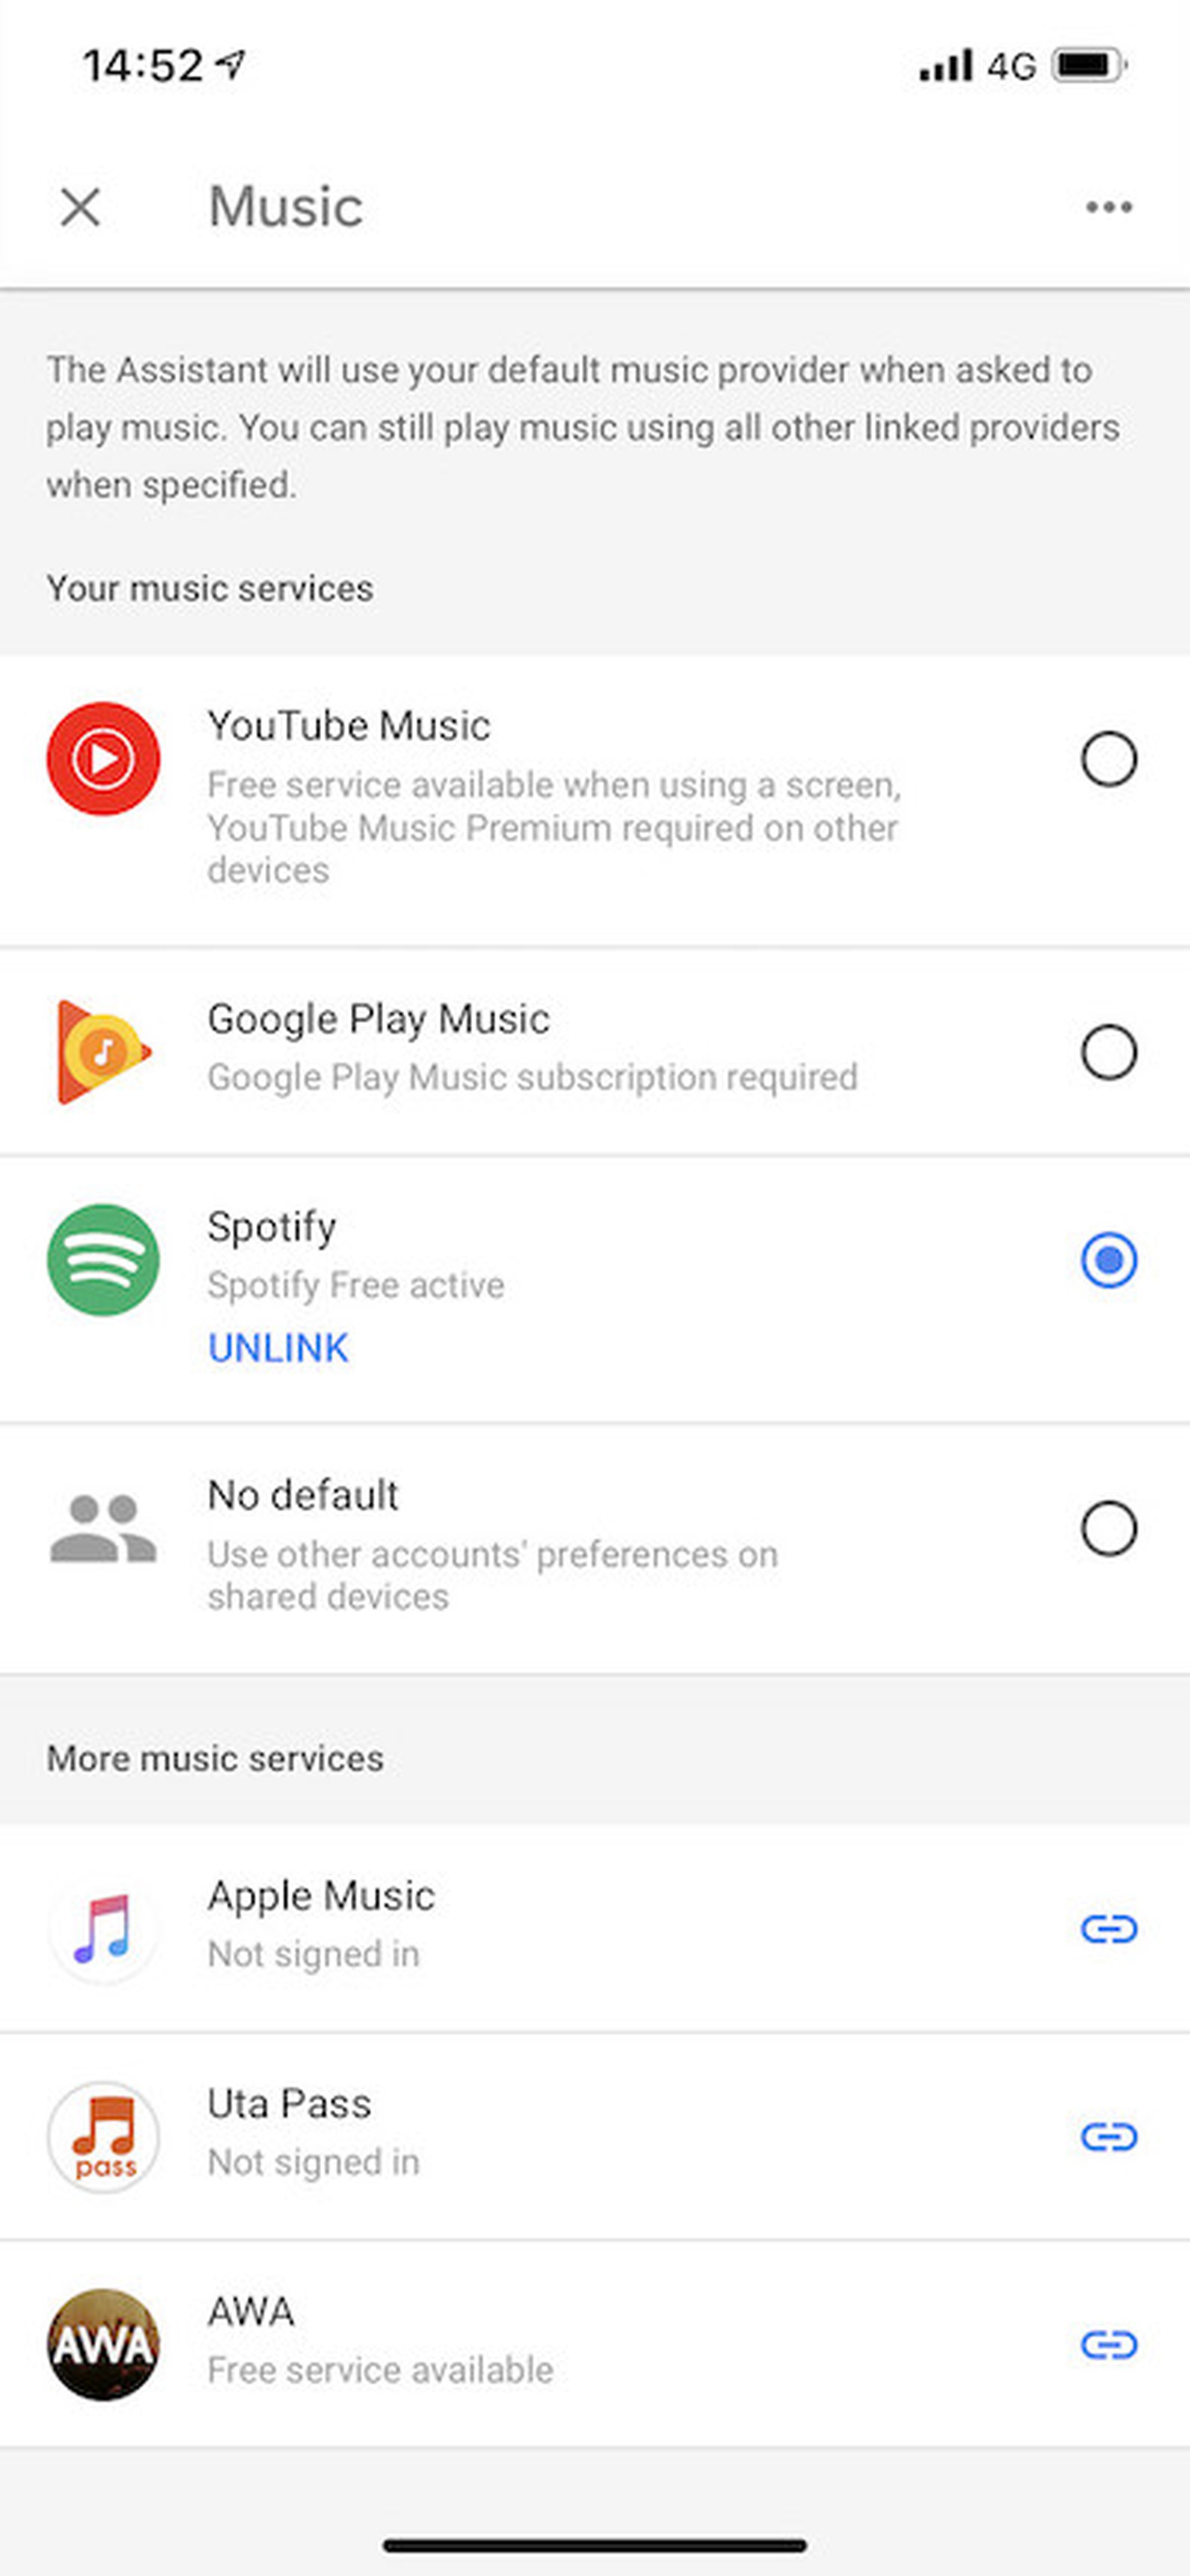 Apple Music now listed in the Music section of the Google Home app.